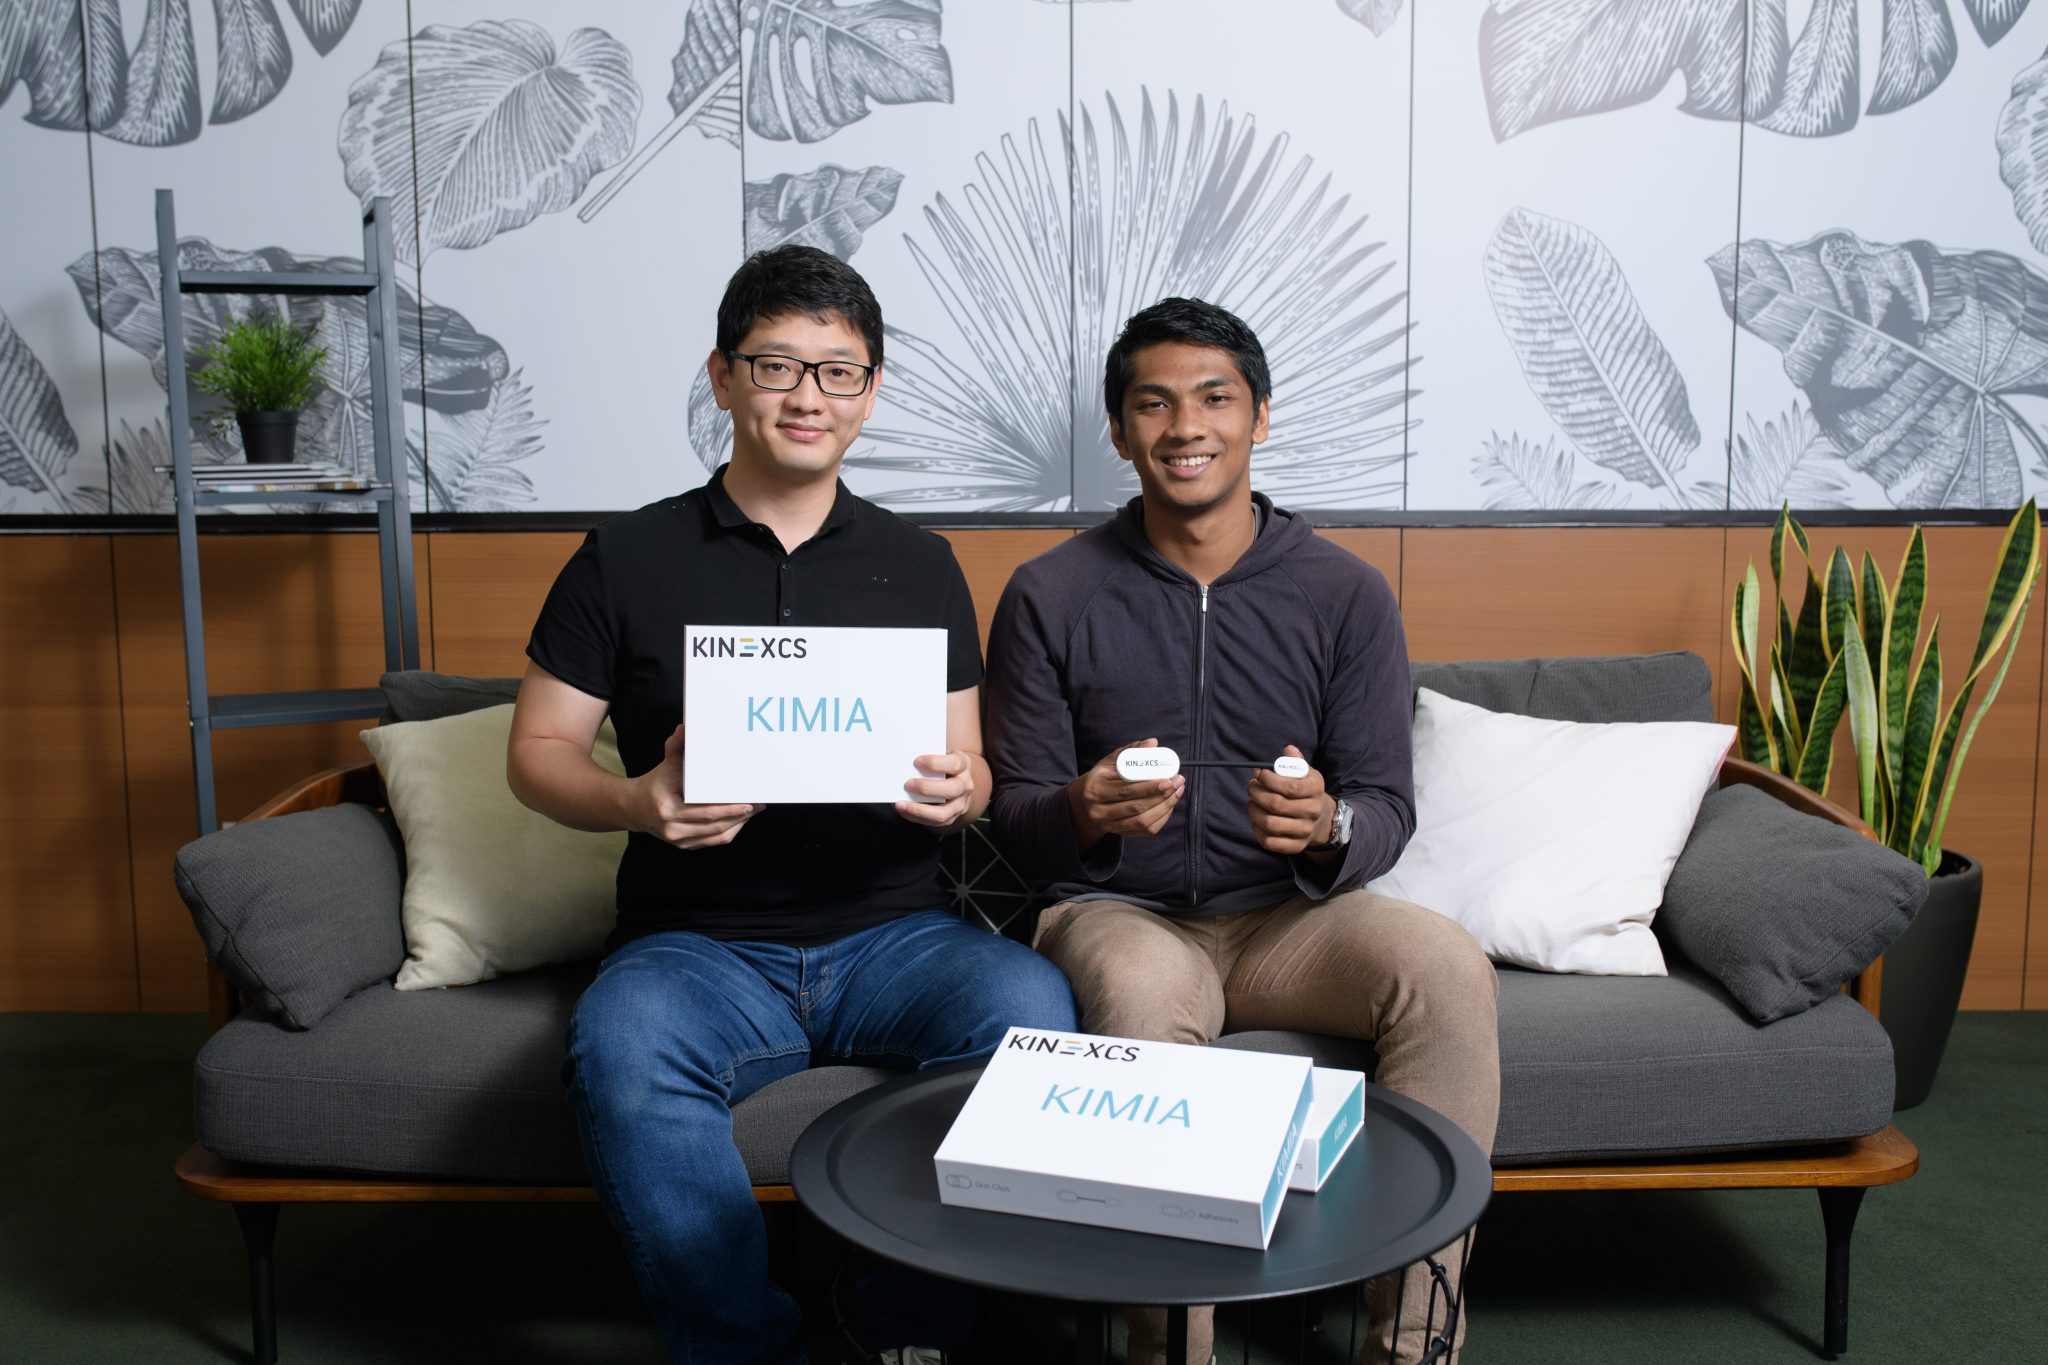 NUS Engineering alumni Ricky Guo Ziming (left) and Aaron Ramzeen are coinventors of KIMIA and Singapore National Winners of the 2020 James Dyson Award.